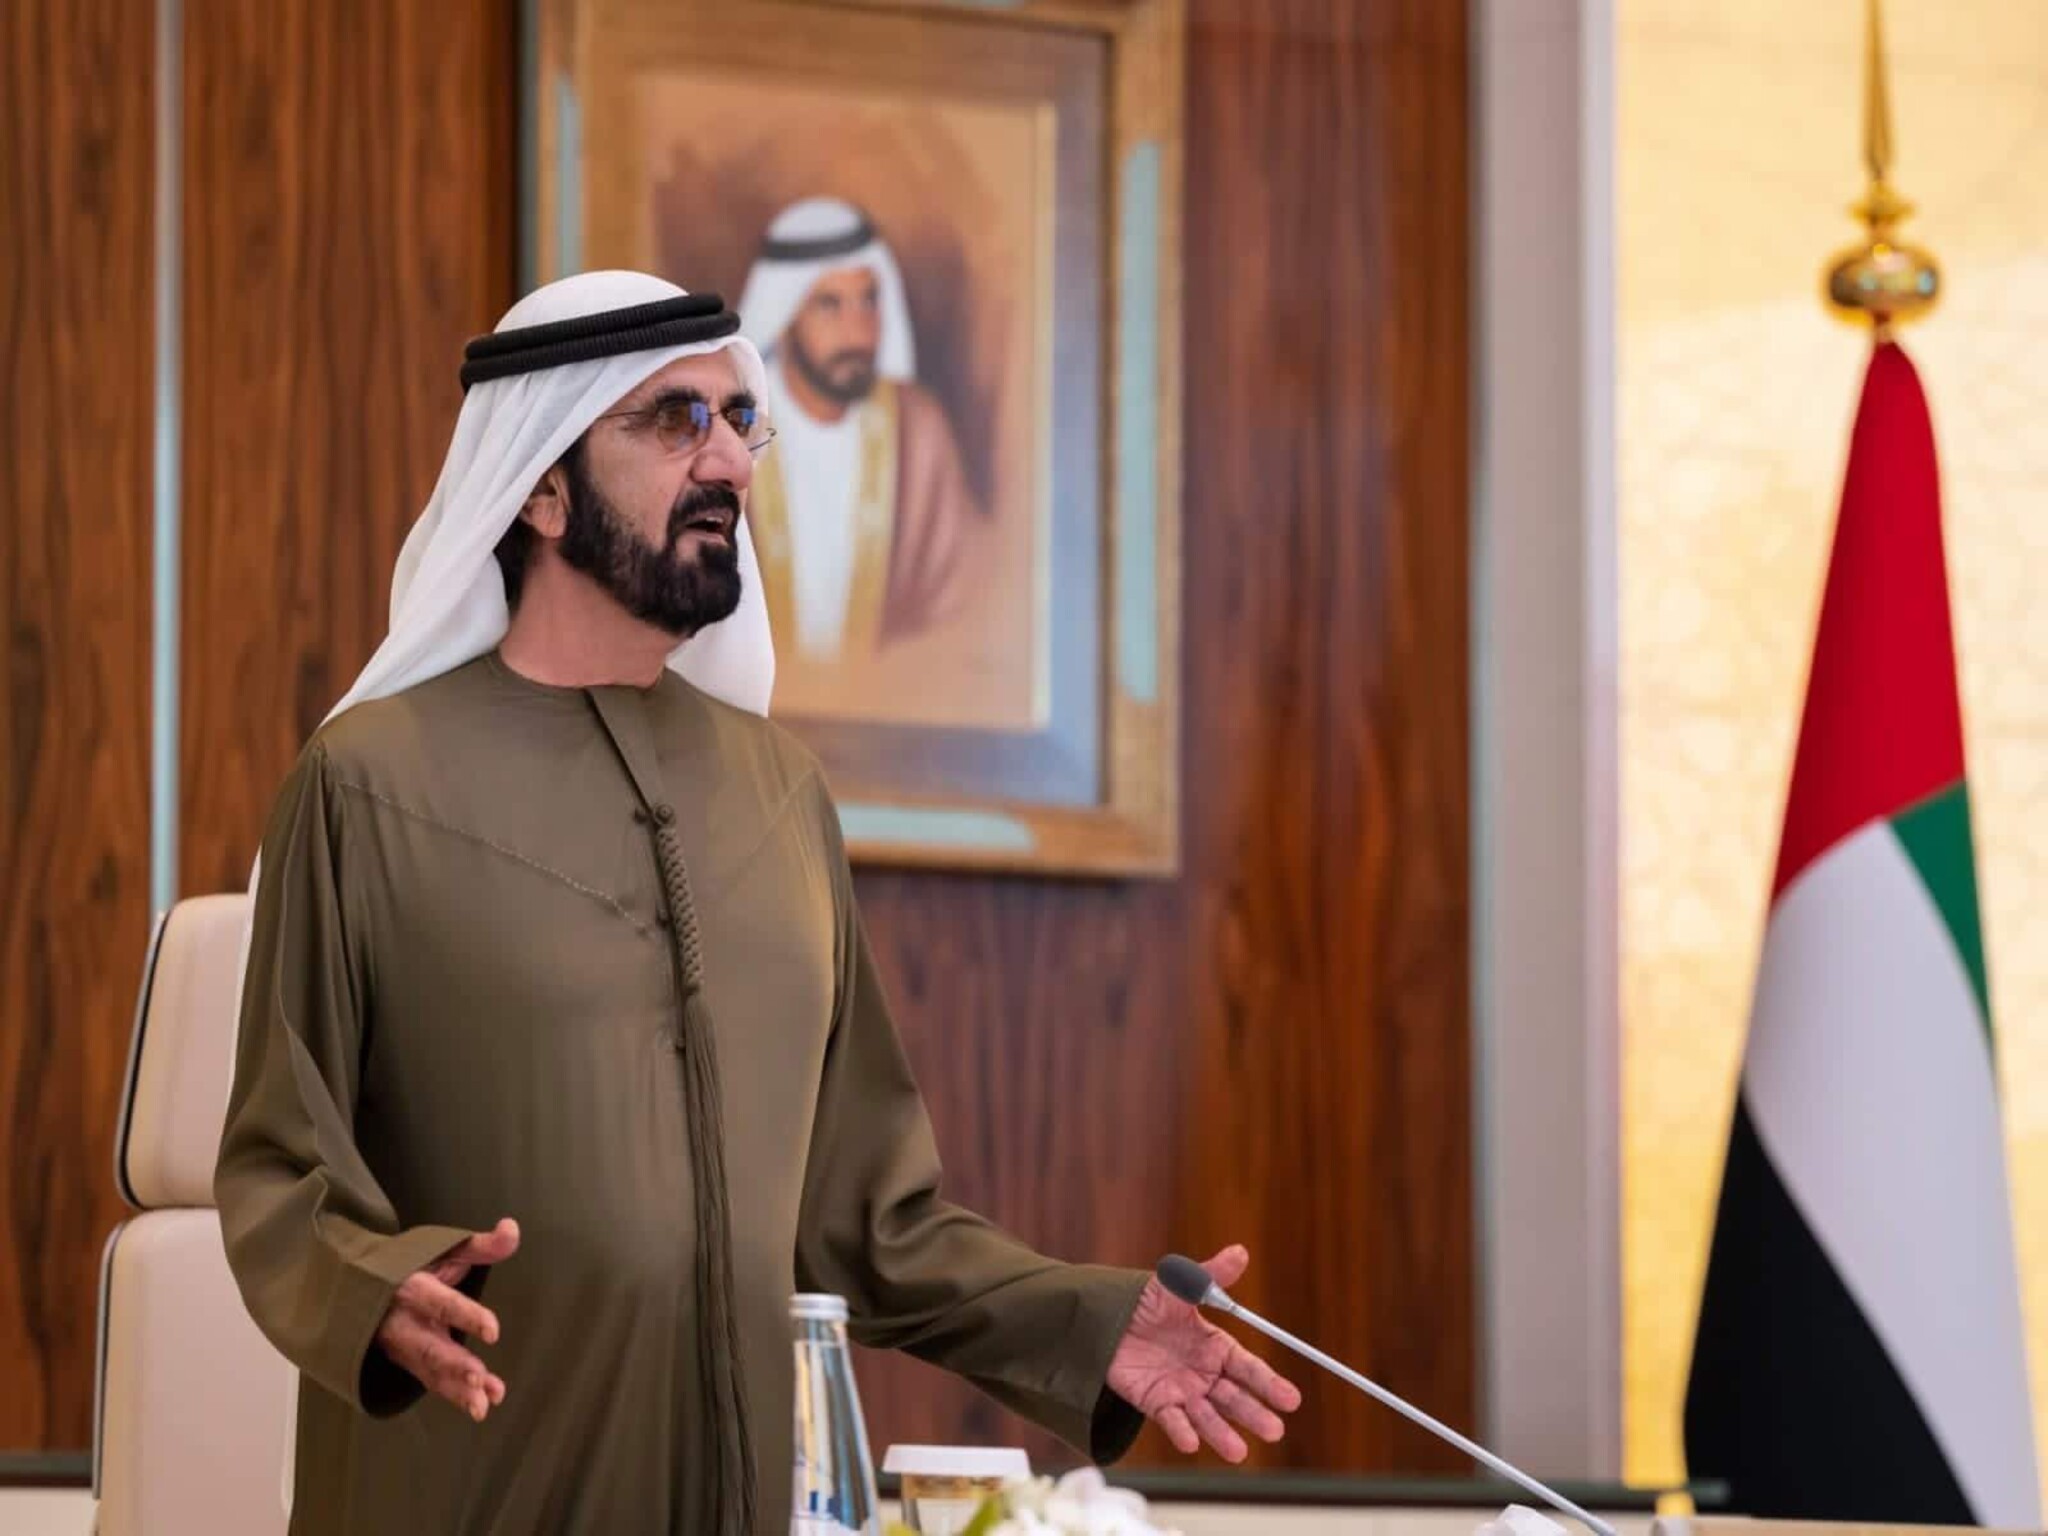 UAE: The digital government announces the availability of a golden residency visa for these residents